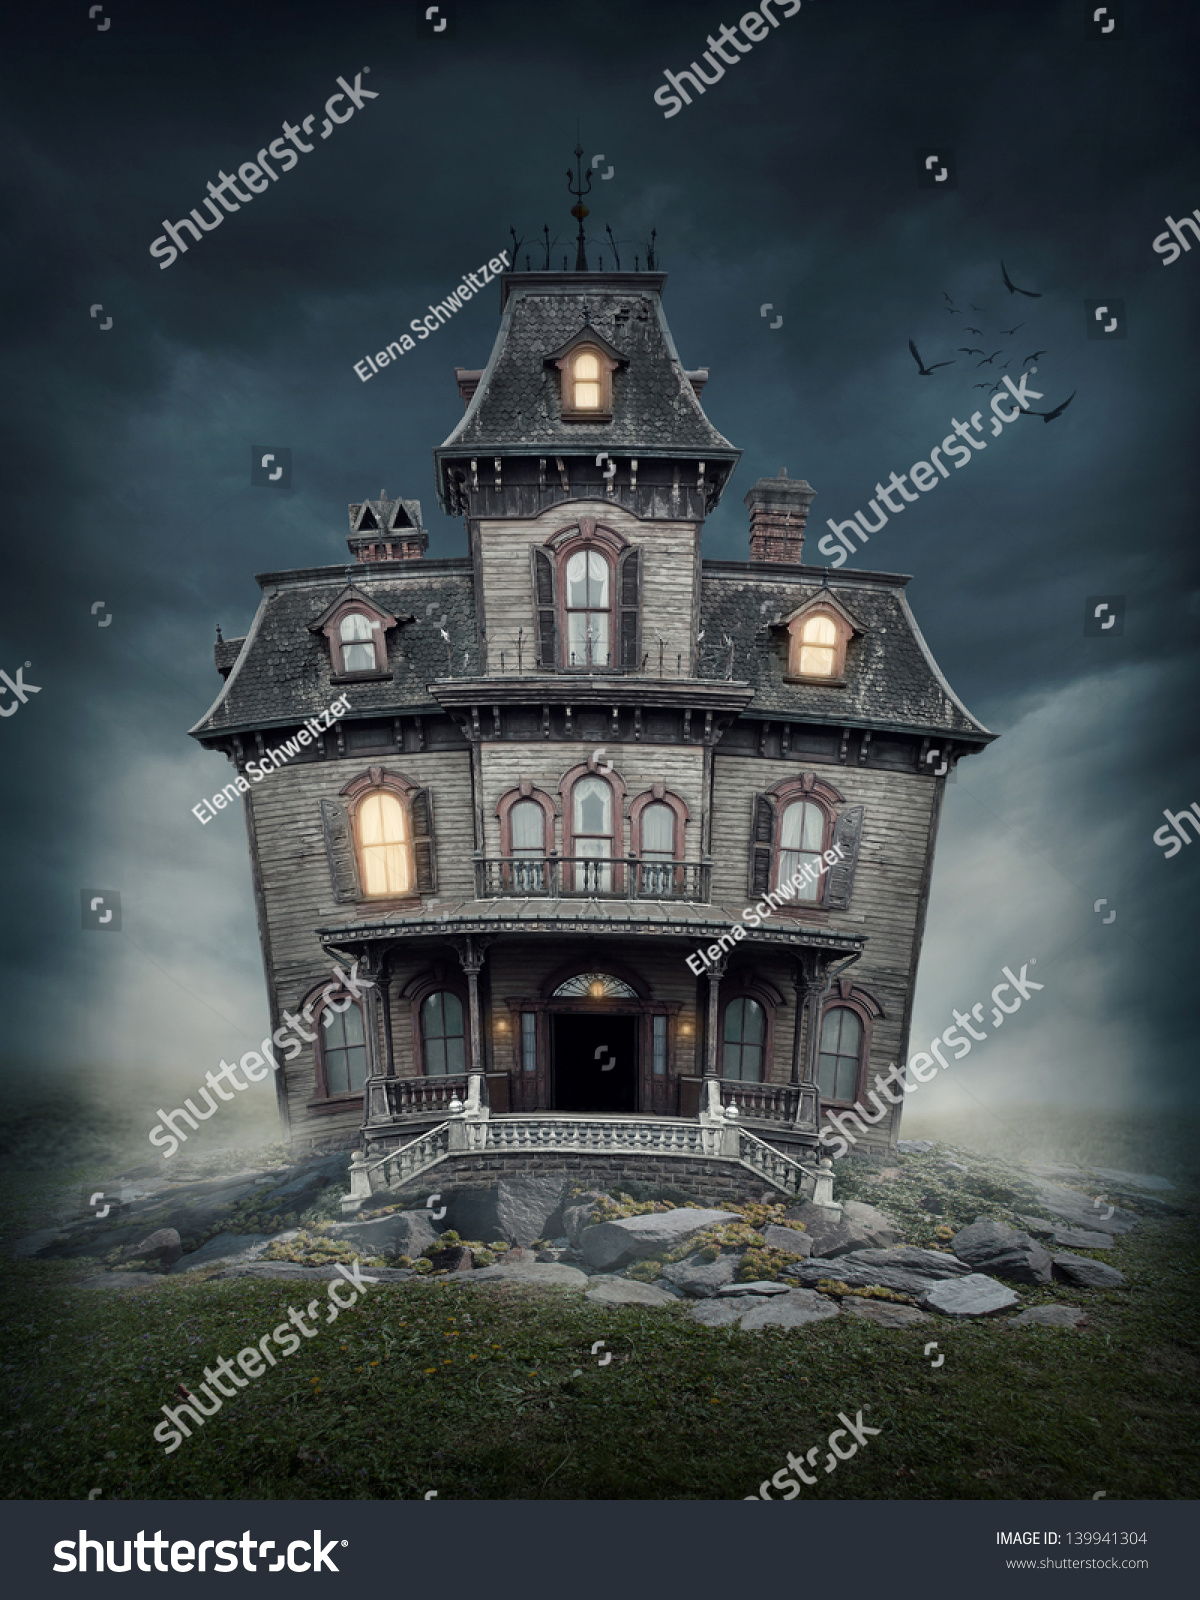 Haunted house on the empty field #139941304